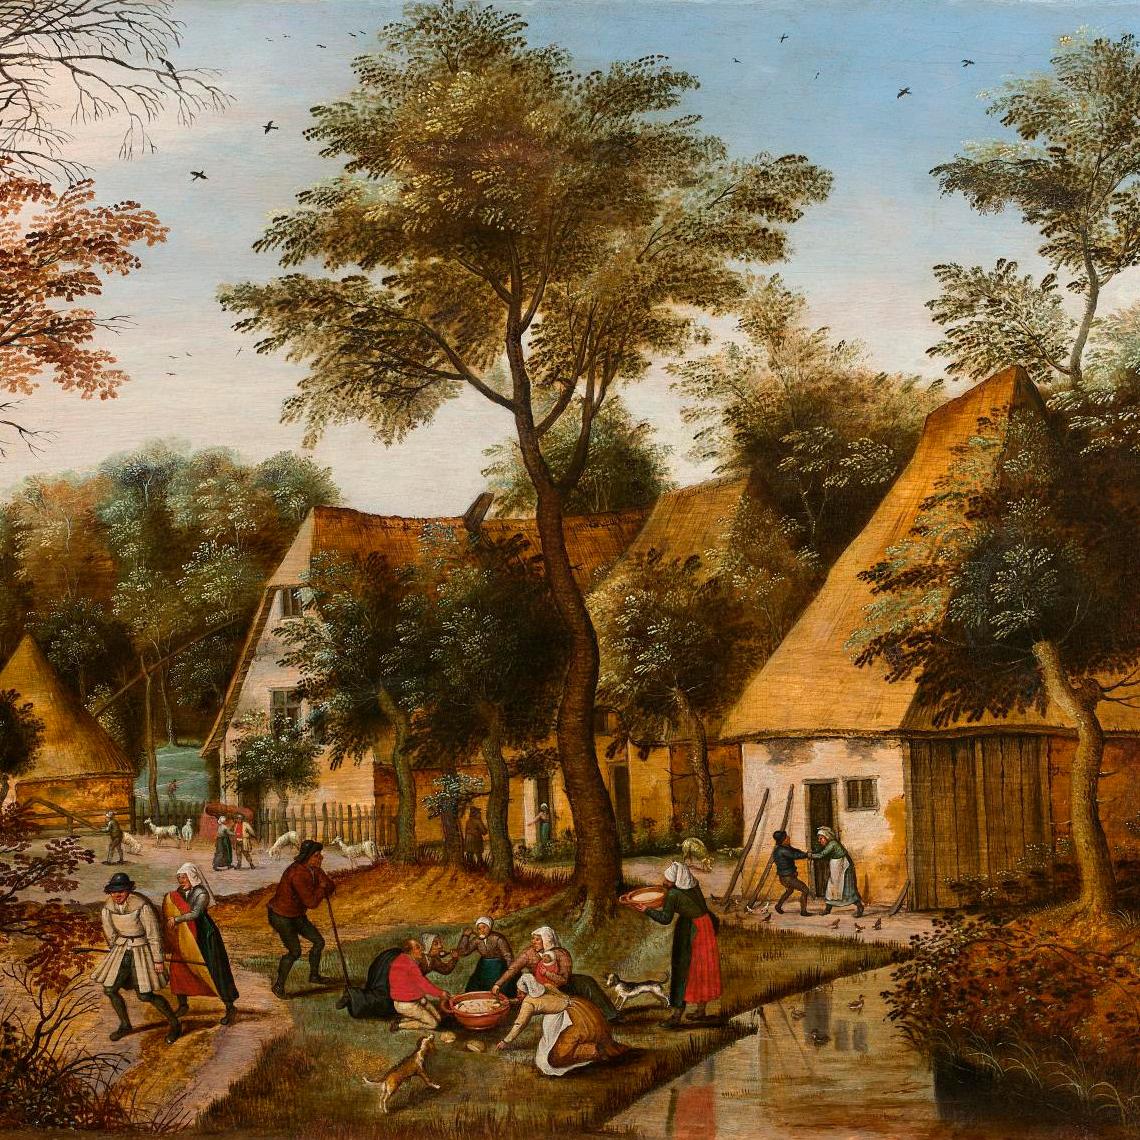 Bruegel the Younger’s "Peasants' Meal in the Village"